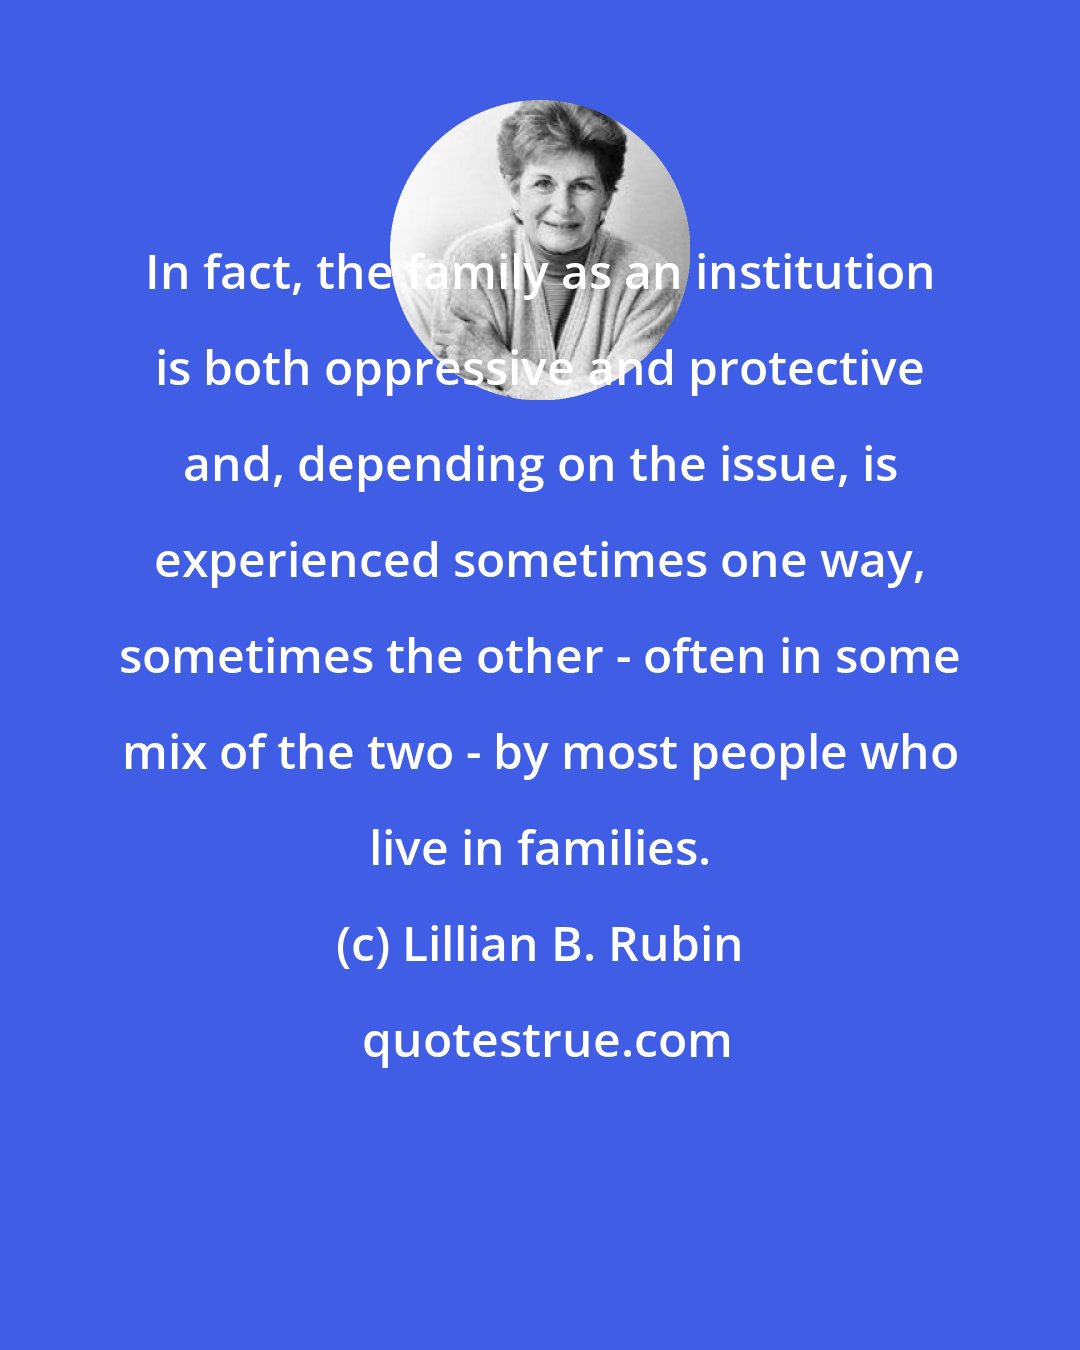 Lillian B. Rubin: In fact, the family as an institution is both oppressive and protective and, depending on the issue, is experienced sometimes one way, sometimes the other - often in some mix of the two - by most people who live in families.